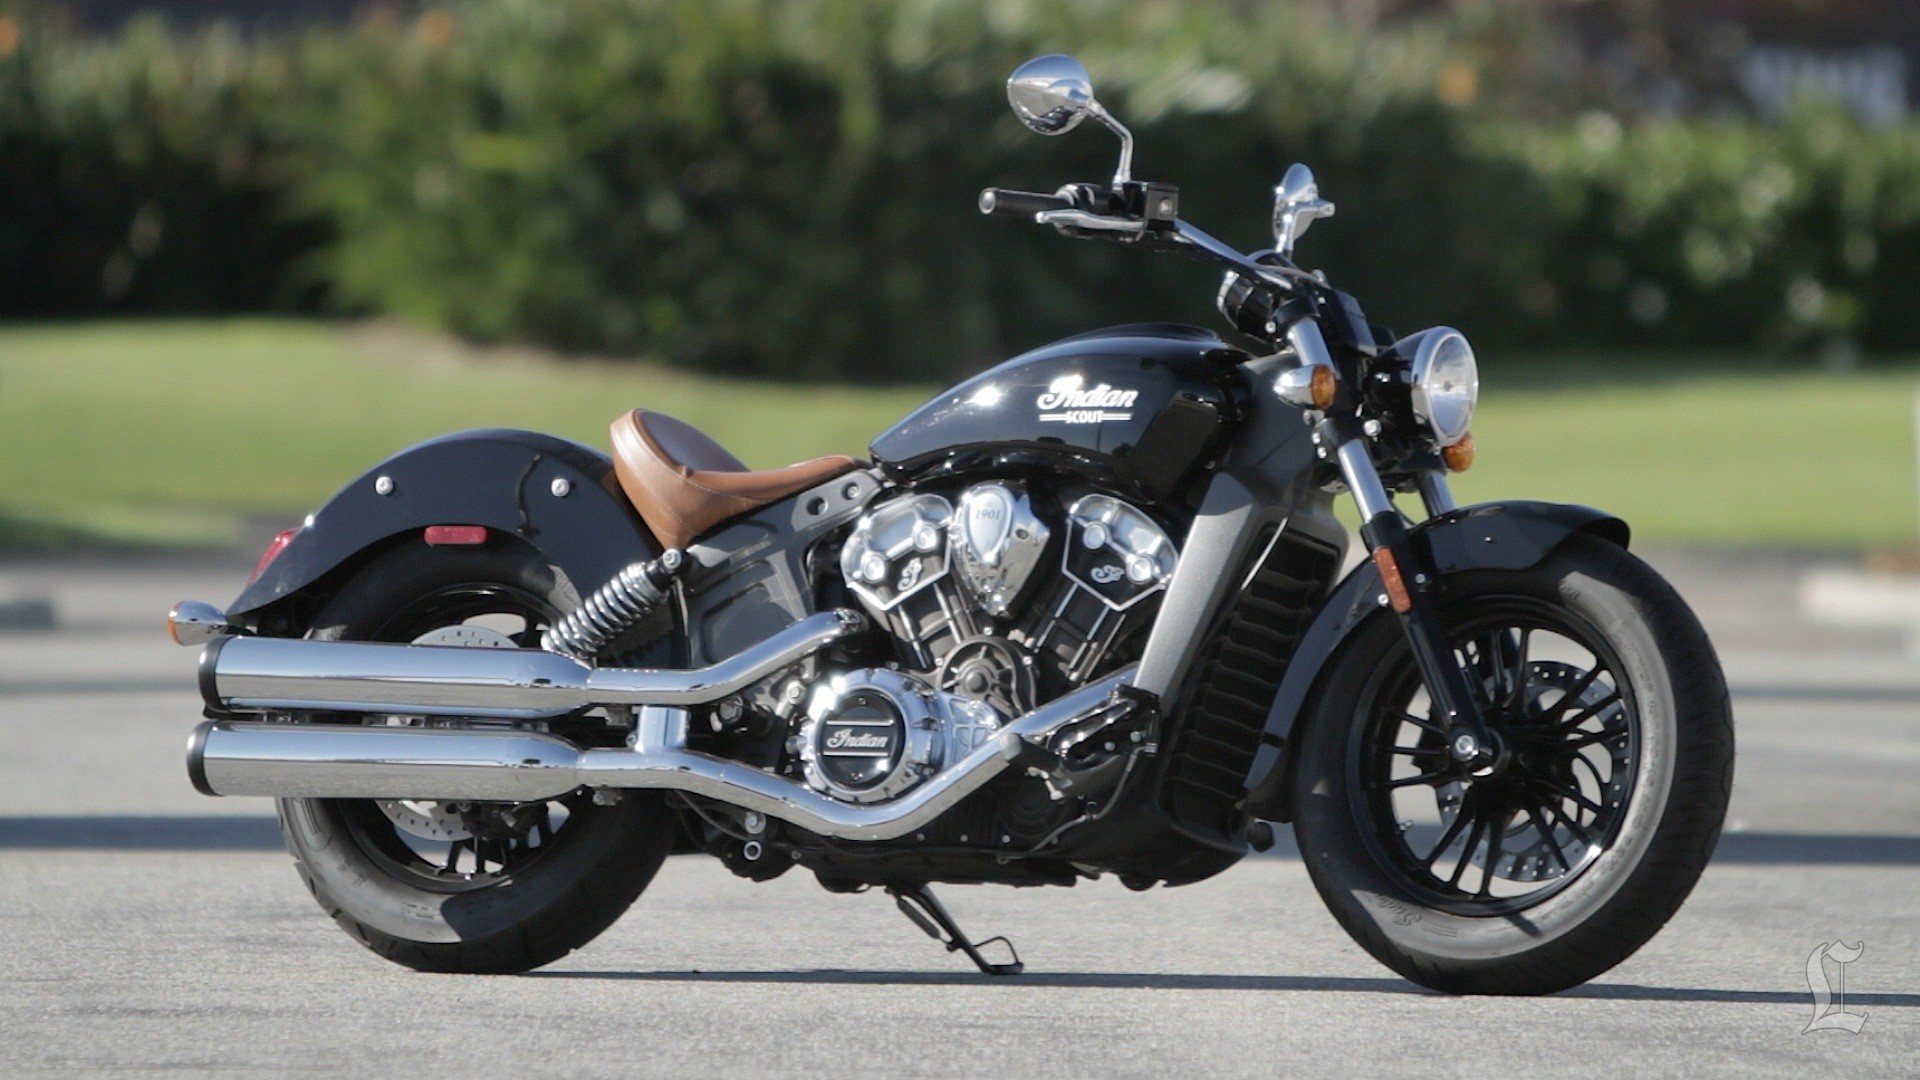 [Image: la-fi-hy-first-ride-2015-indian-scout-20140924]